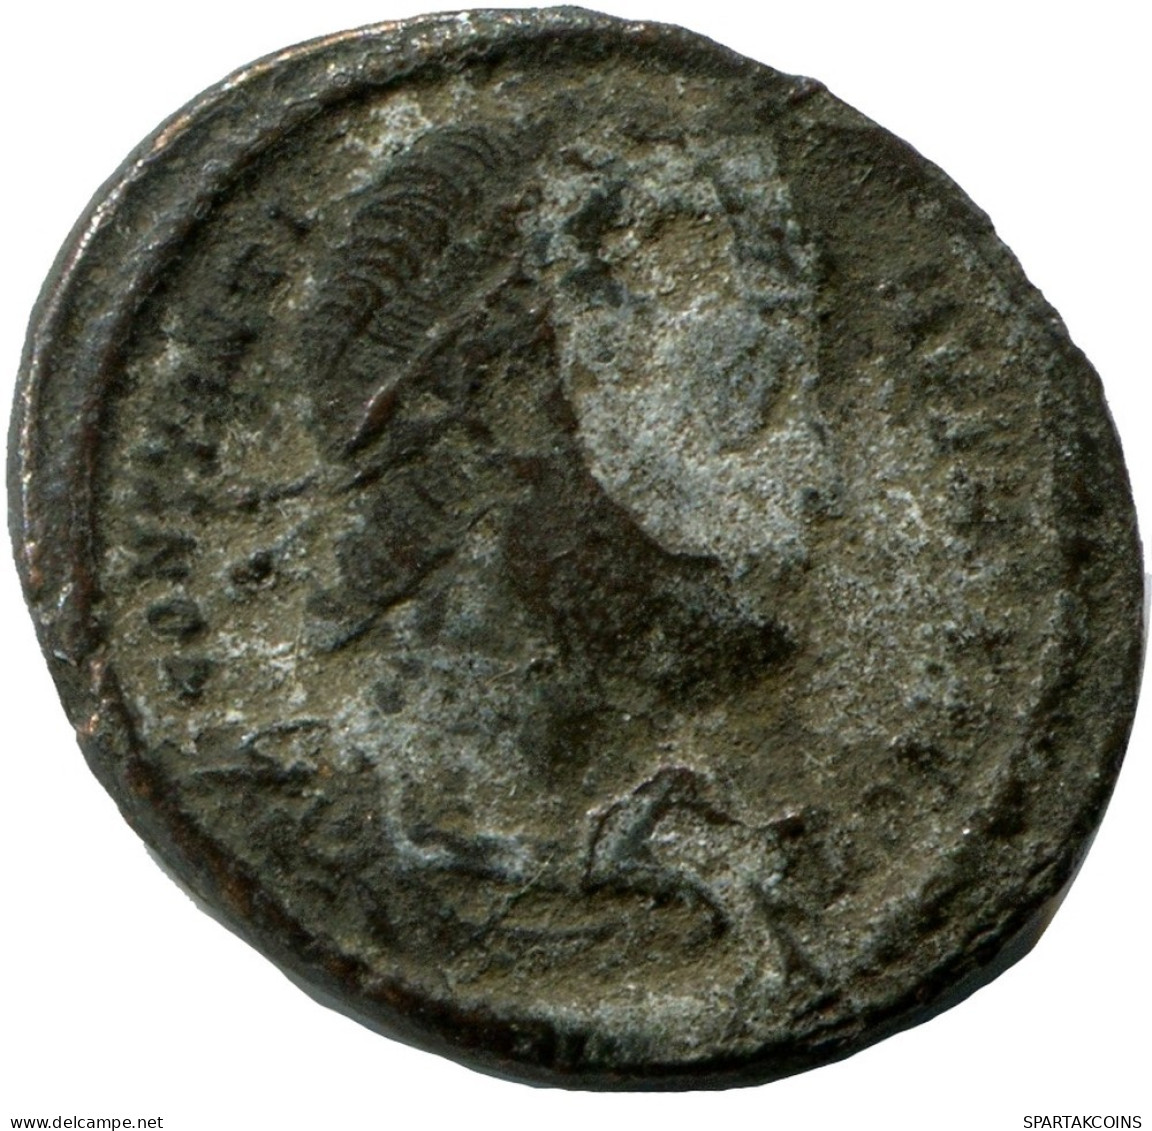 CONSTANTINE I MINTED IN ANTIOCH FROM THE ROYAL ONTARIO MUSEUM #ANC10619.14.E.A - The Christian Empire (307 AD To 363 AD)